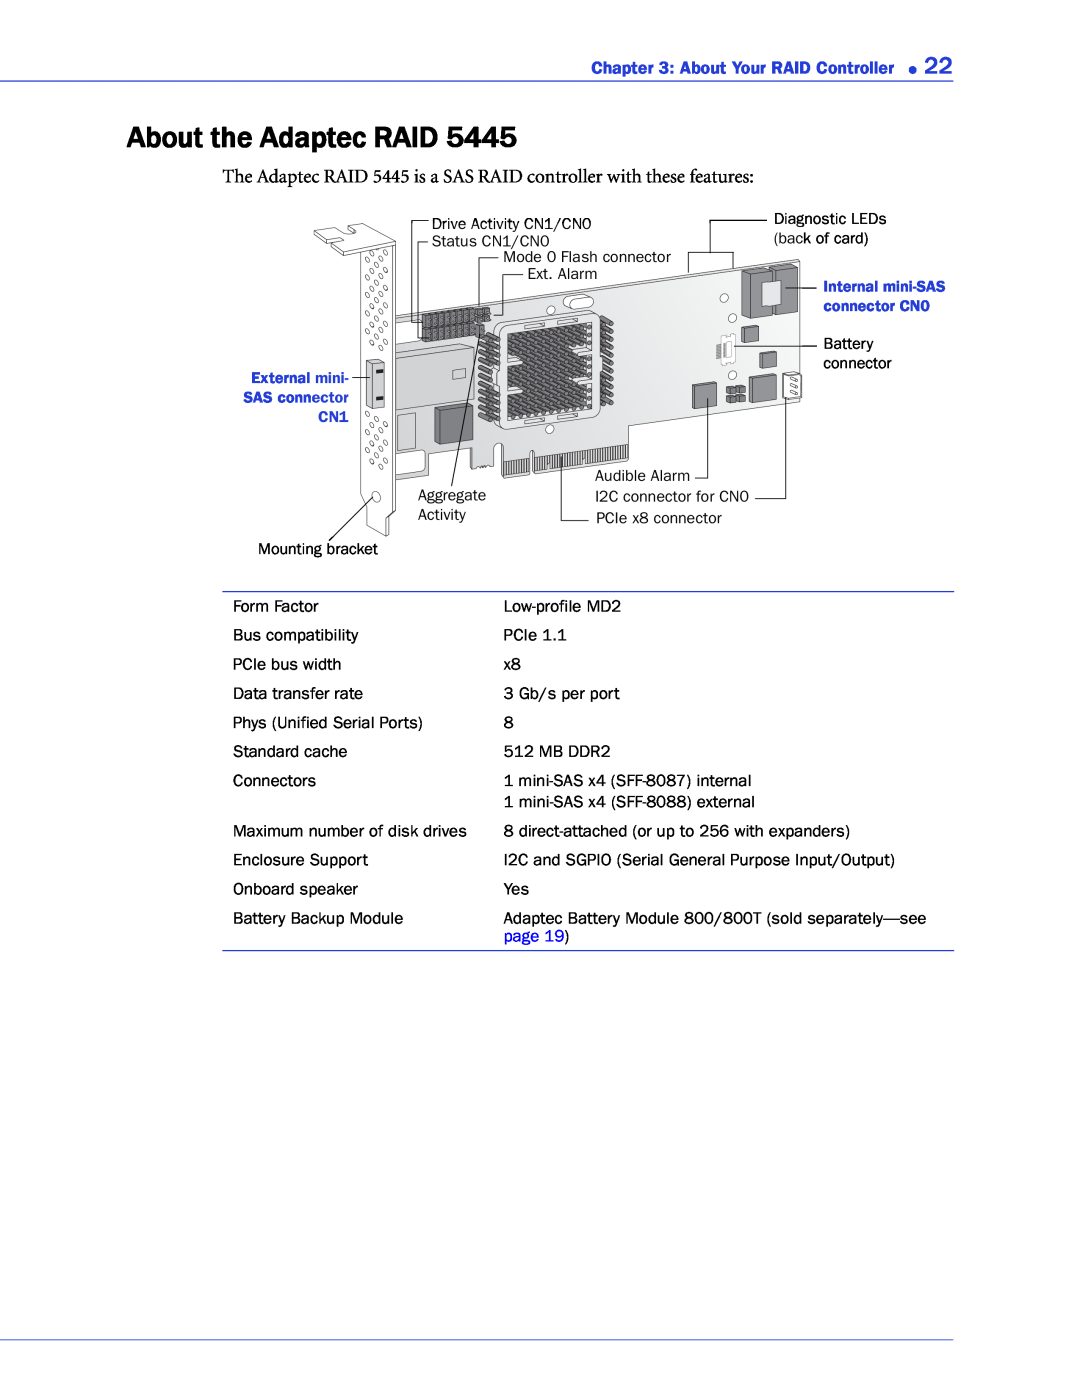 Adaptec 2268300R manual About the Adaptec RAID, The Adaptec RAID 5445 is a SAS RAID controller with these features, page 